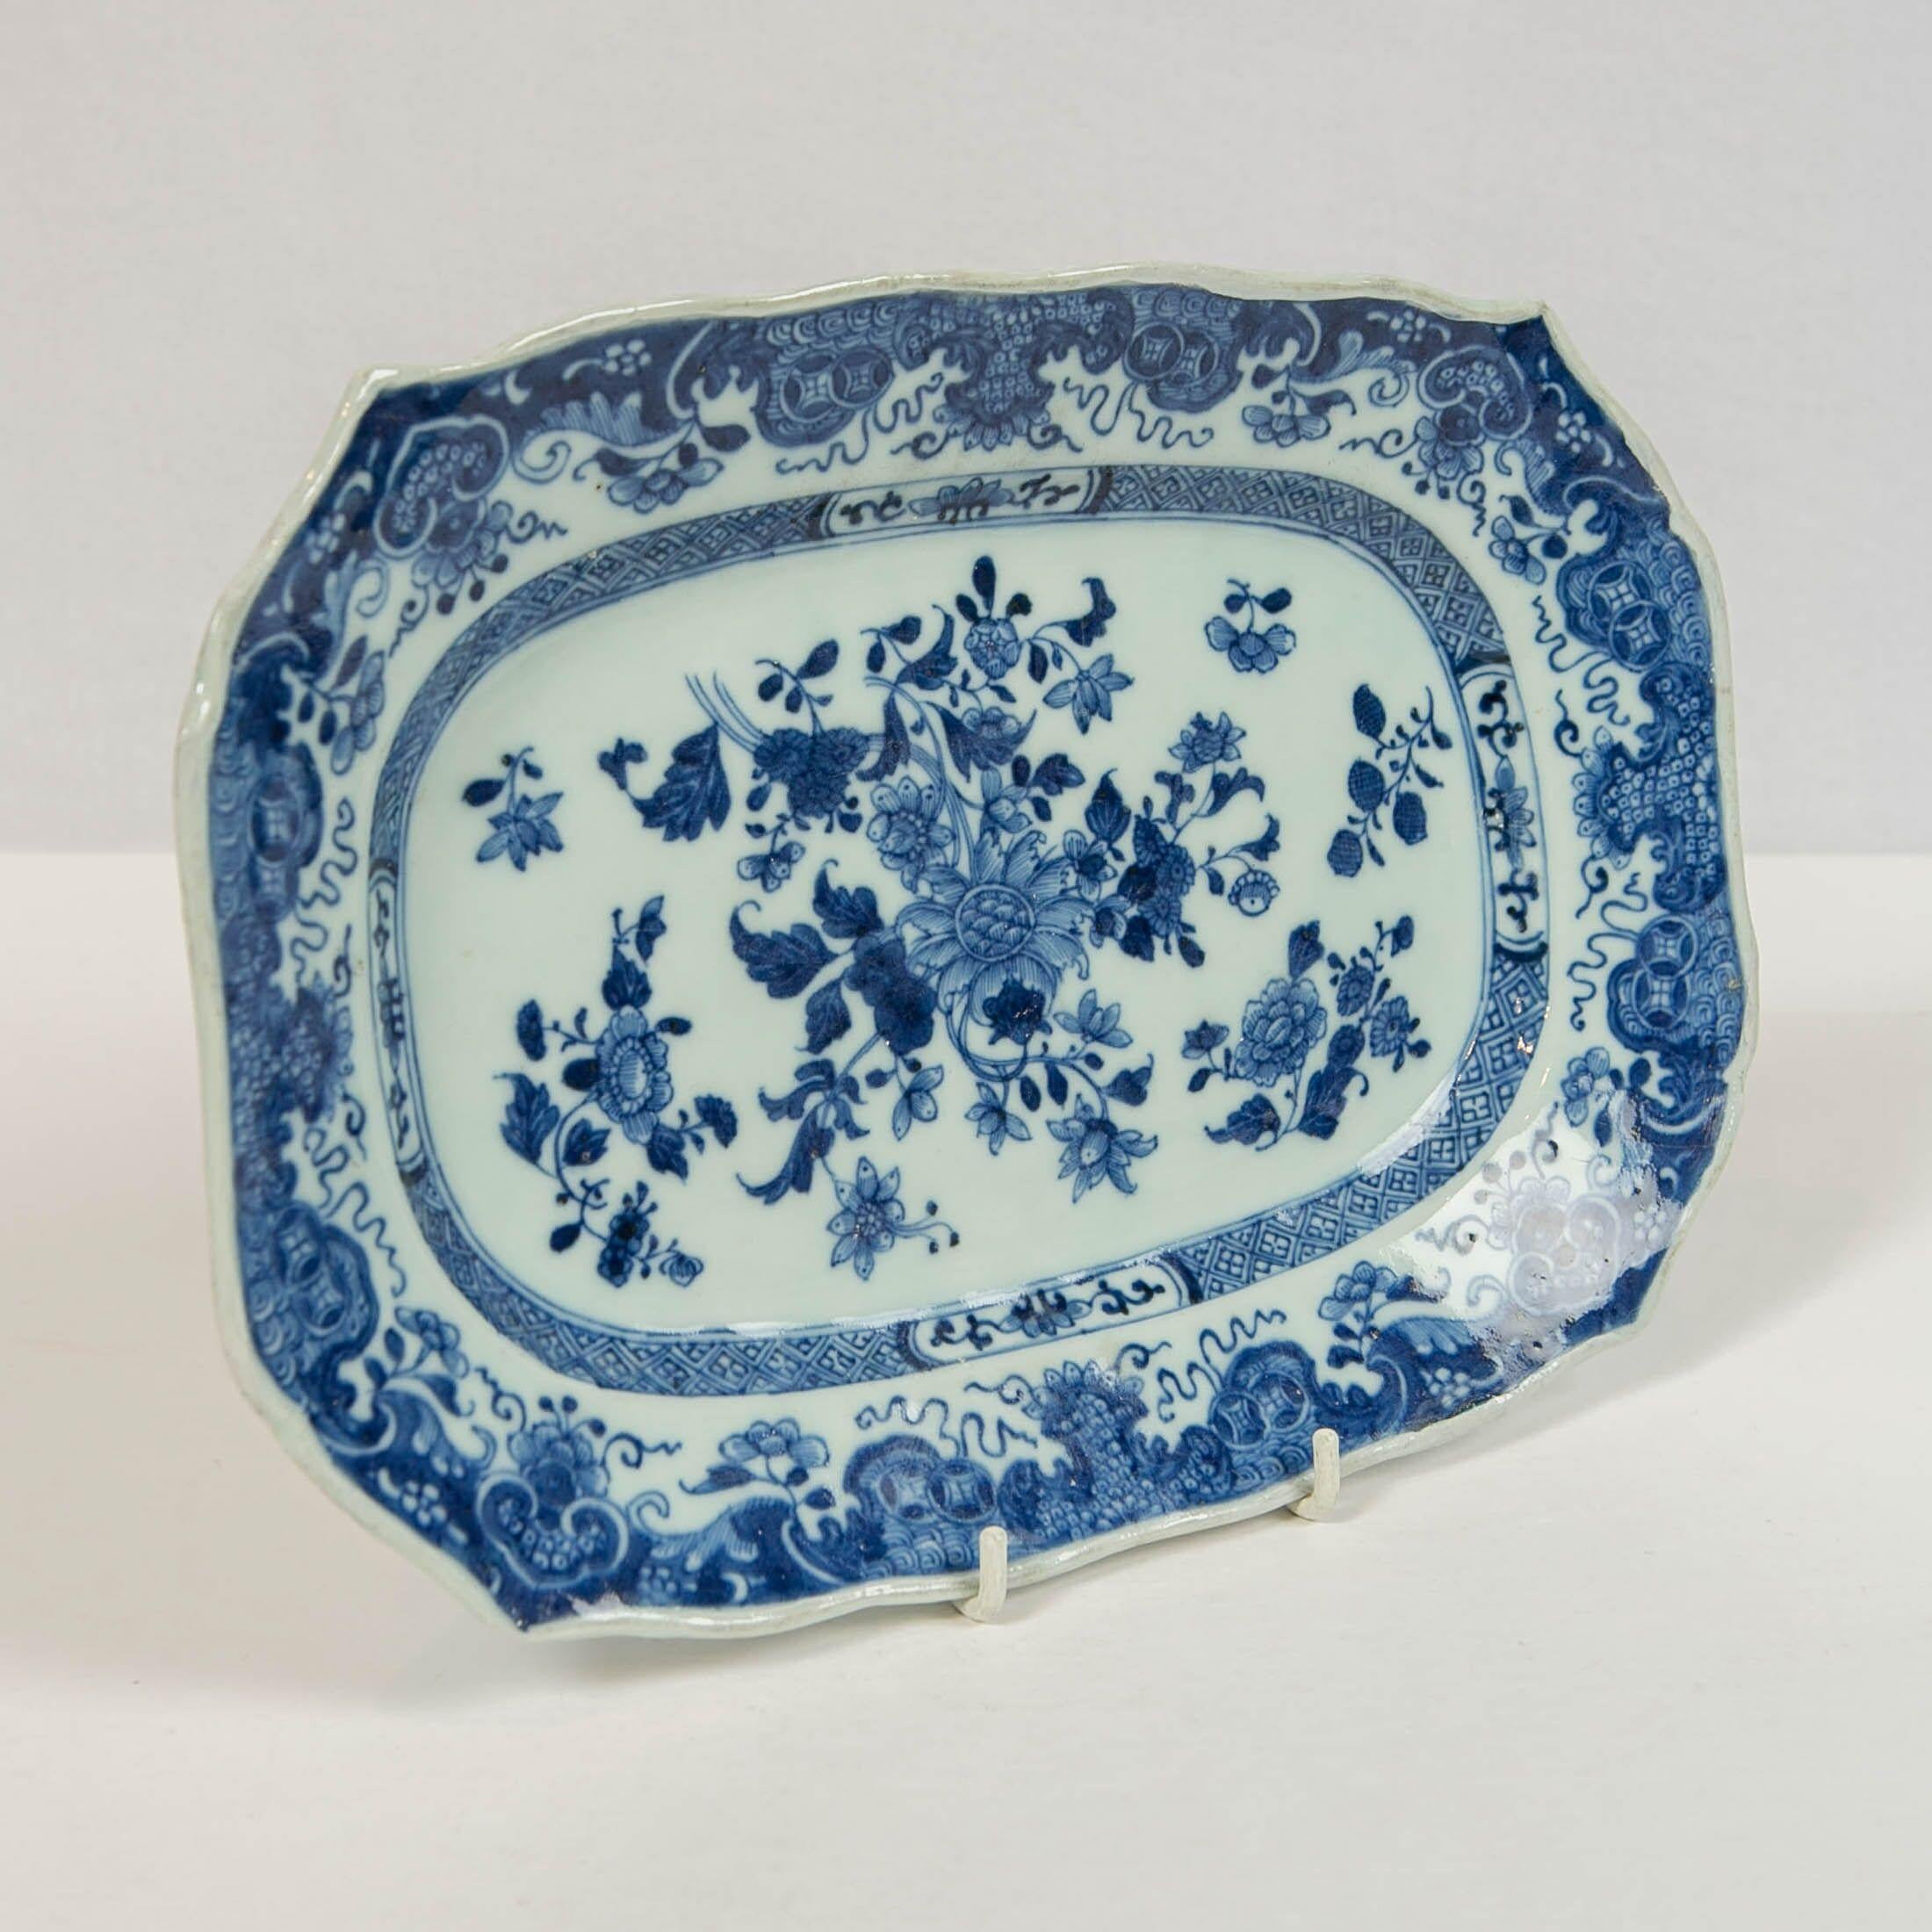 Porcelain Chinese Blue and White Small Platter Made circa 1770 during the Qianlong Period